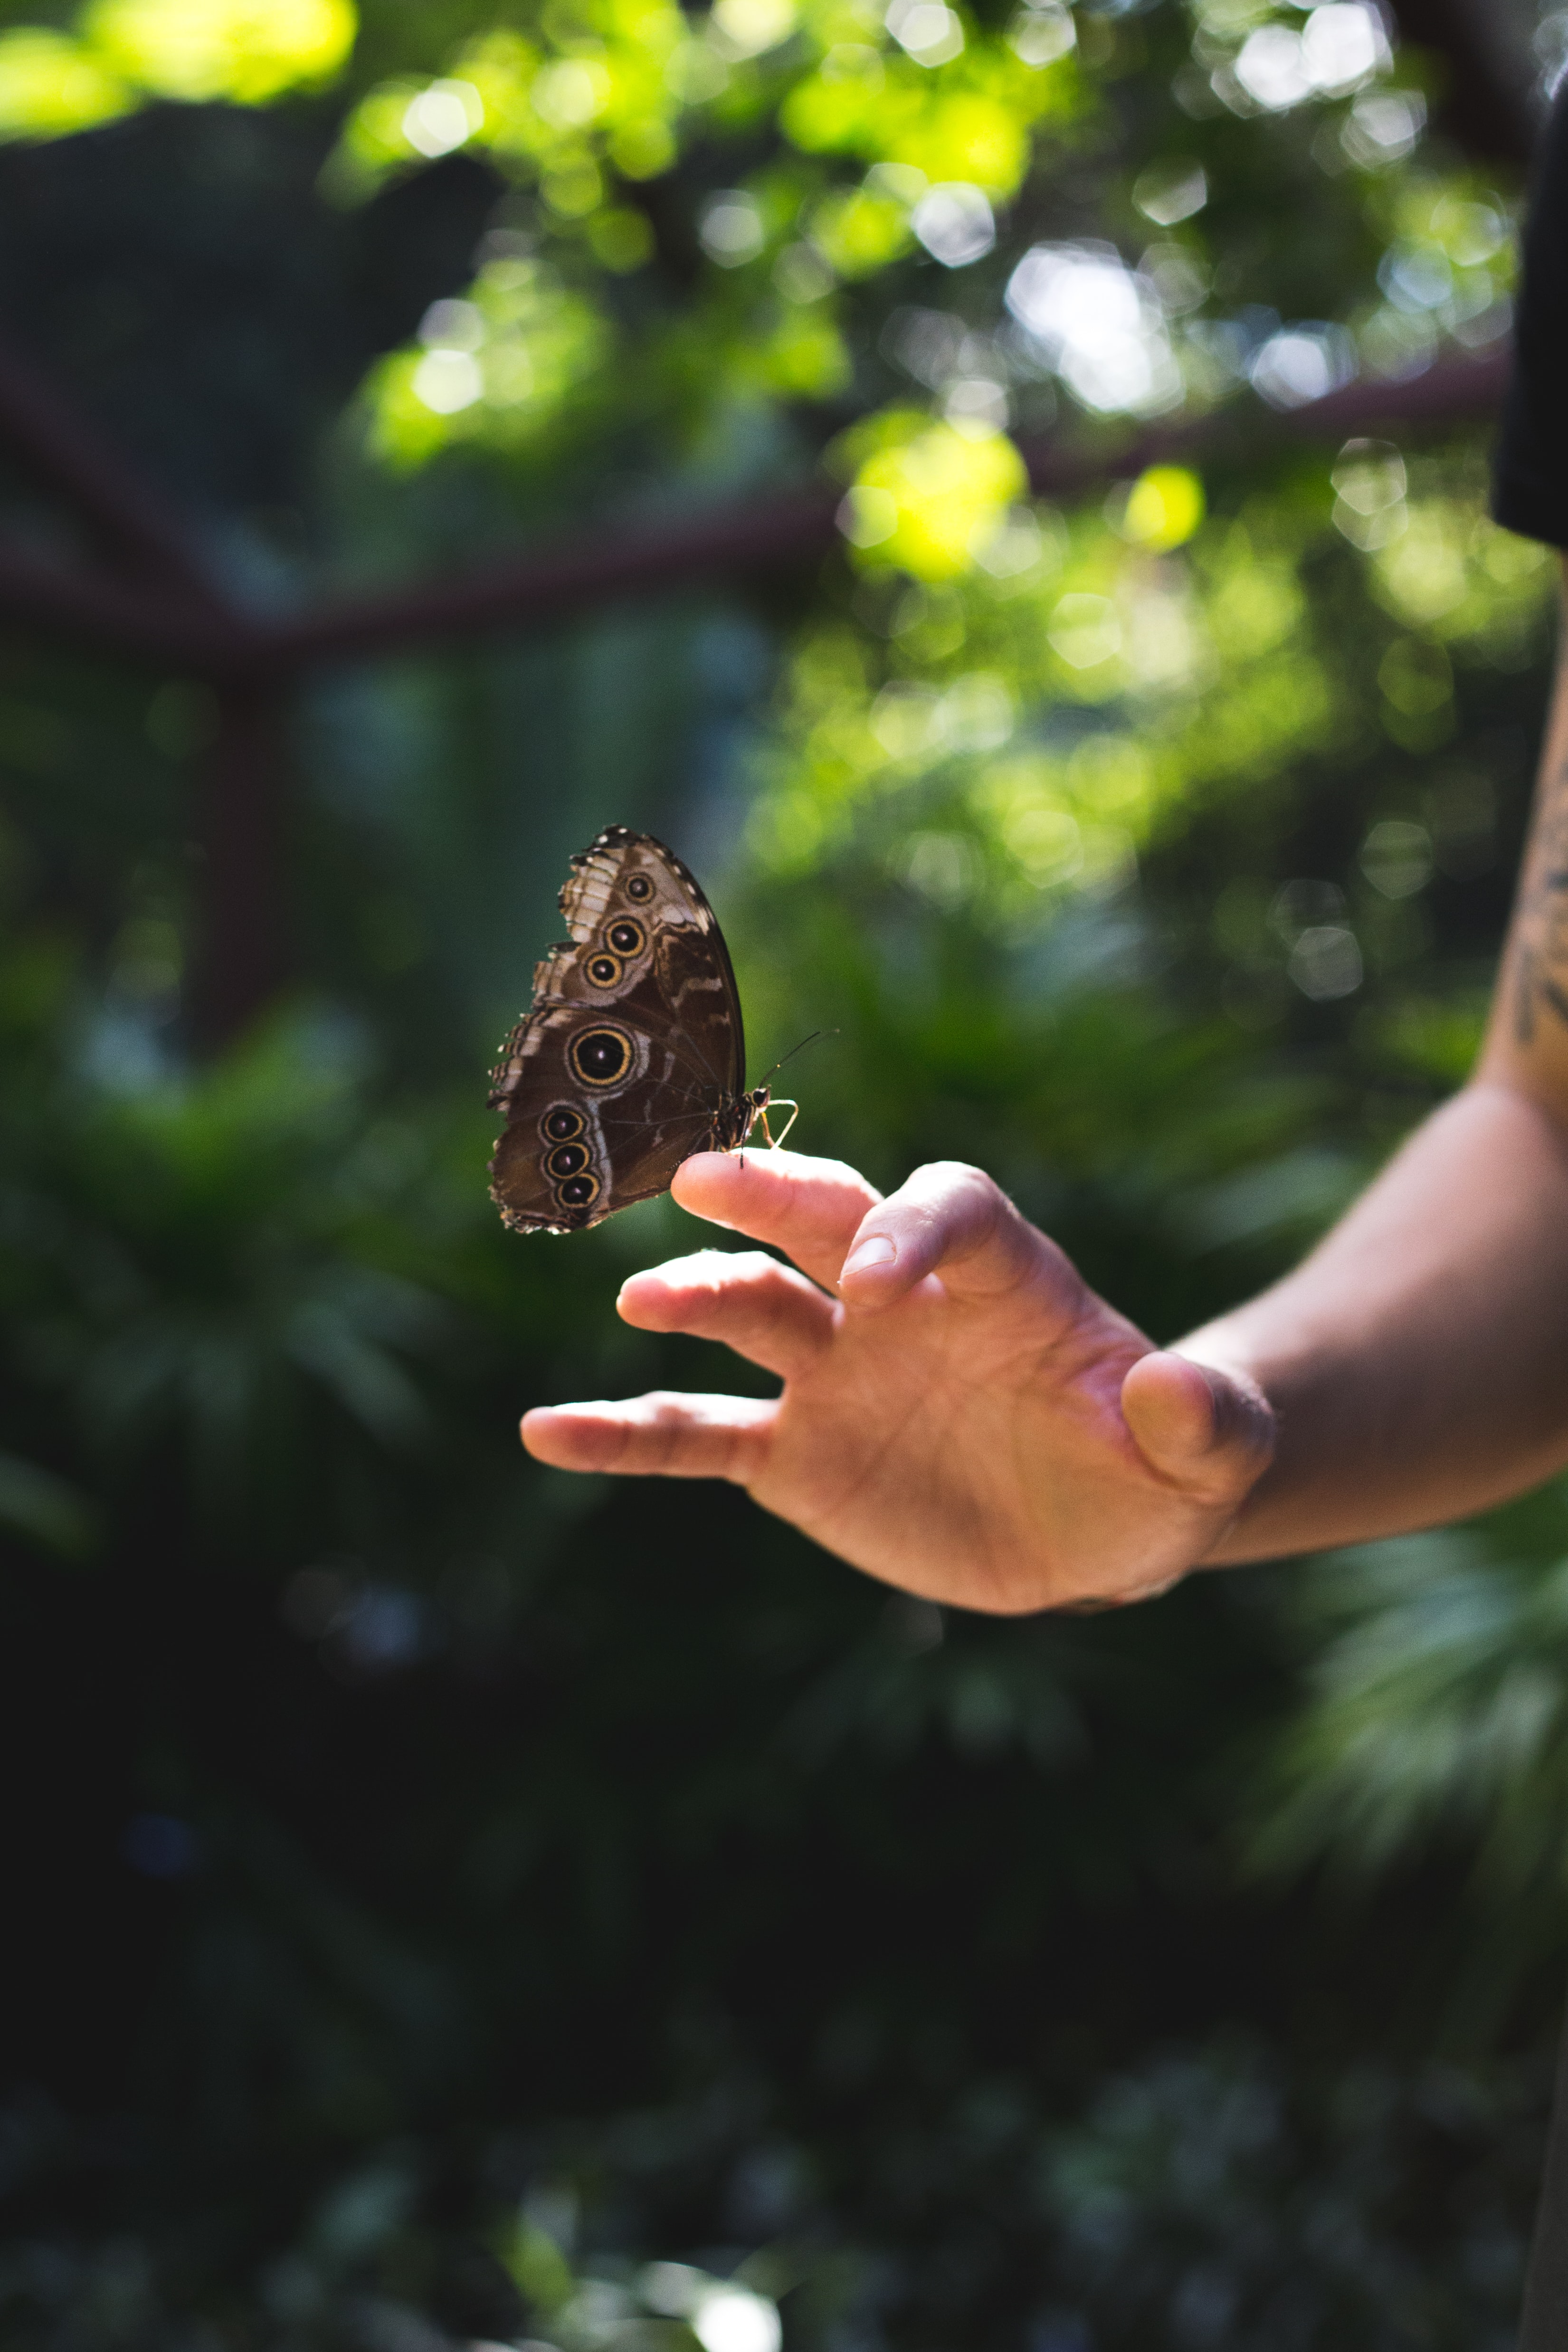 Free HD butterfly, hand, nature, miscellanea, miscellaneous, wings